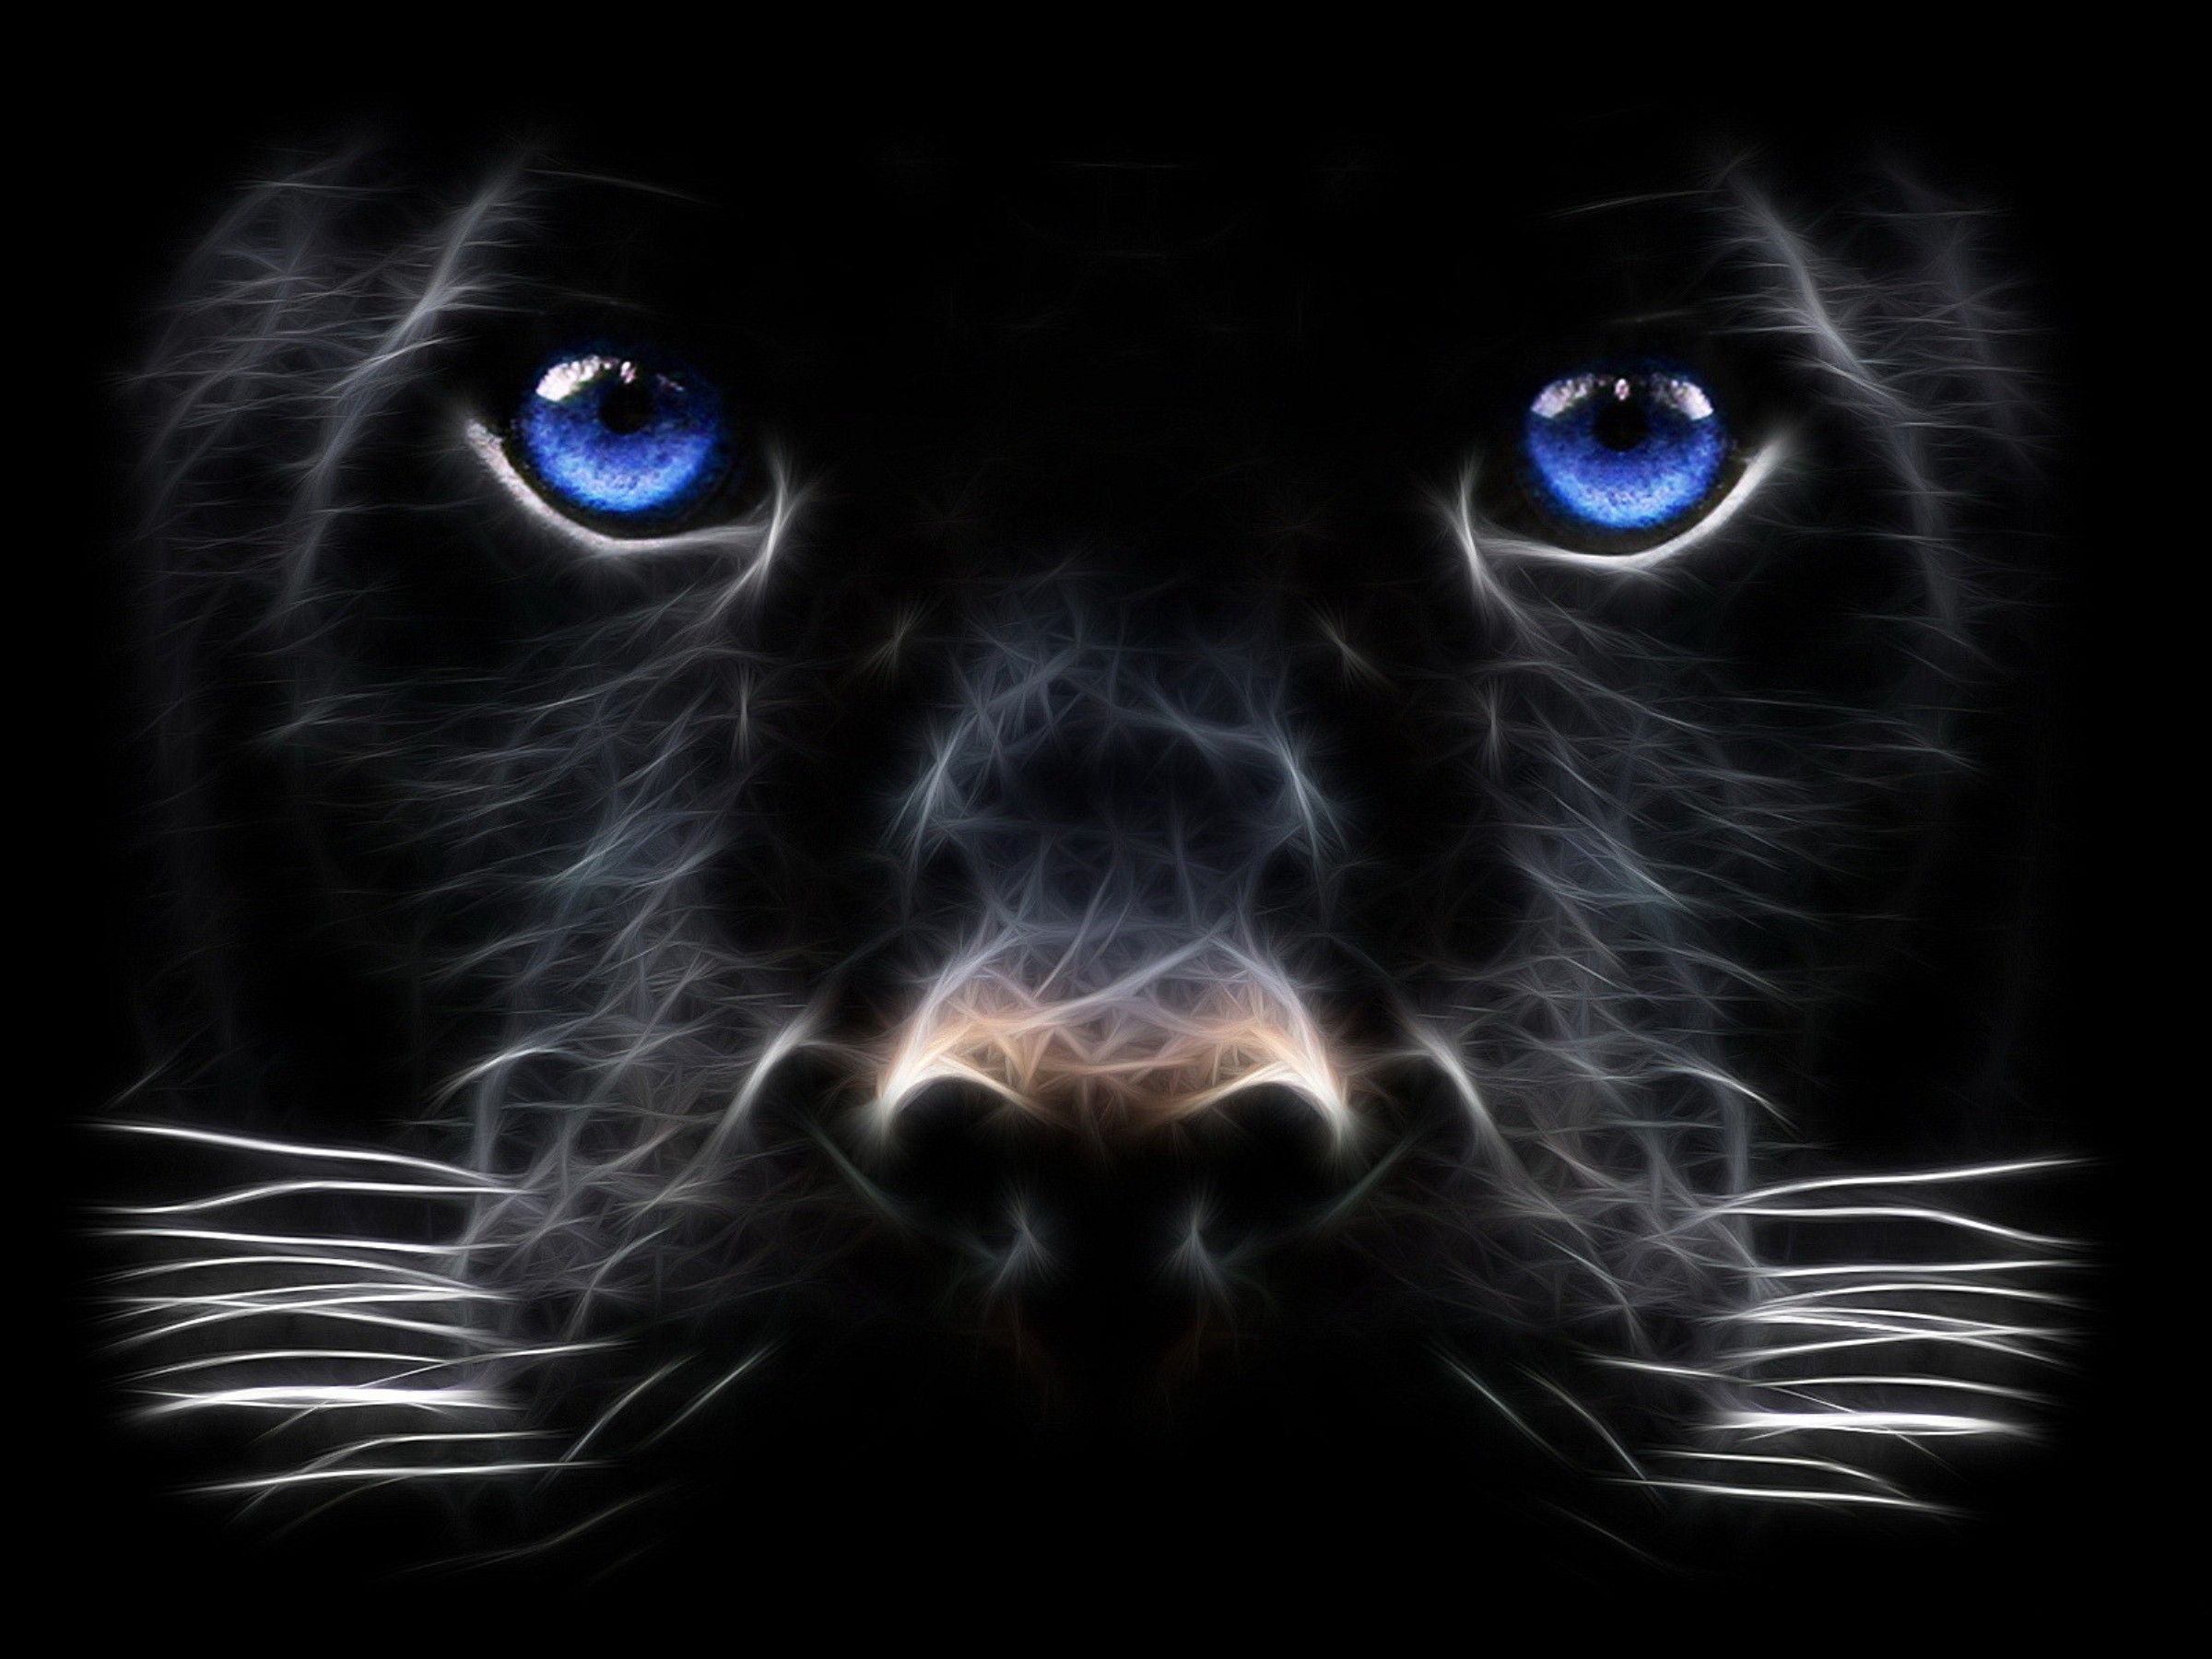 Panther Computer Wallpapers, Desktop Backgrounds 2400x1800 ID